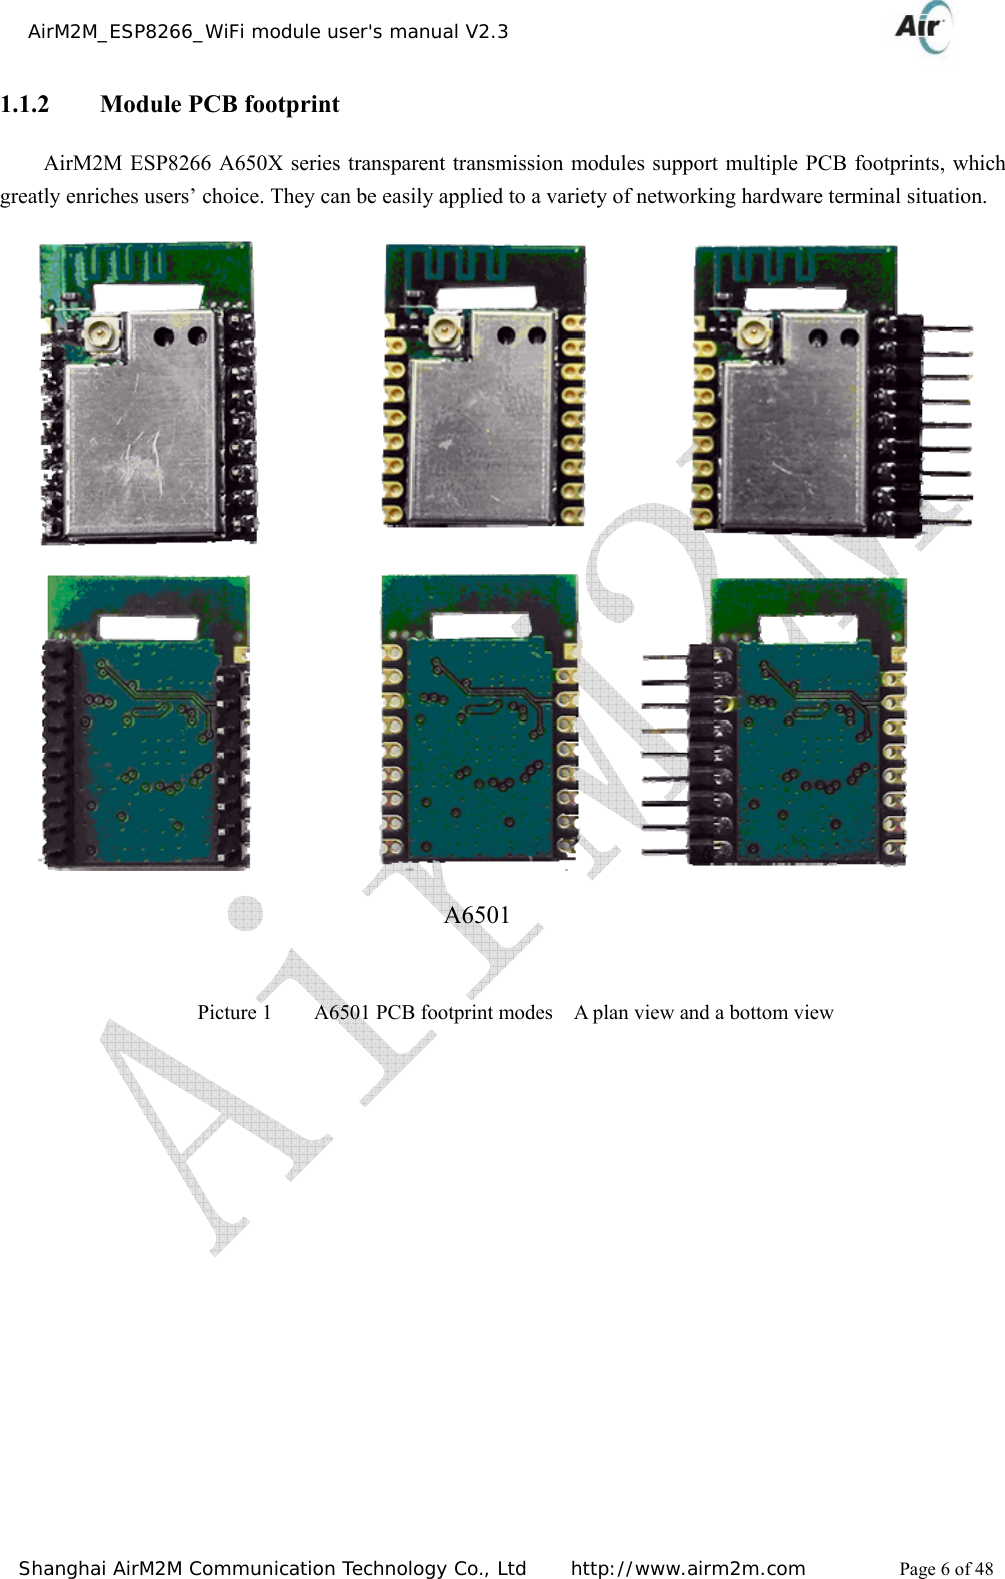    AirM2M_ESP8266_WiFi module user&apos;s manual V2.3   Shanghai AirM2M Communication Technology Co., Ltd     http://www.airm2m.com          Page 6 of 48 1.1.2   Module PCB footprint AirM2M ESP8266 A650X series transparent transmission modules support multiple PCB footprints, which greatly enriches users’ choice. They can be easily applied to a variety of networking hardware terminal situation.                                                    A6501                          Picture 1        A6501 PCB footprint modes    A plan view and a bottom view 